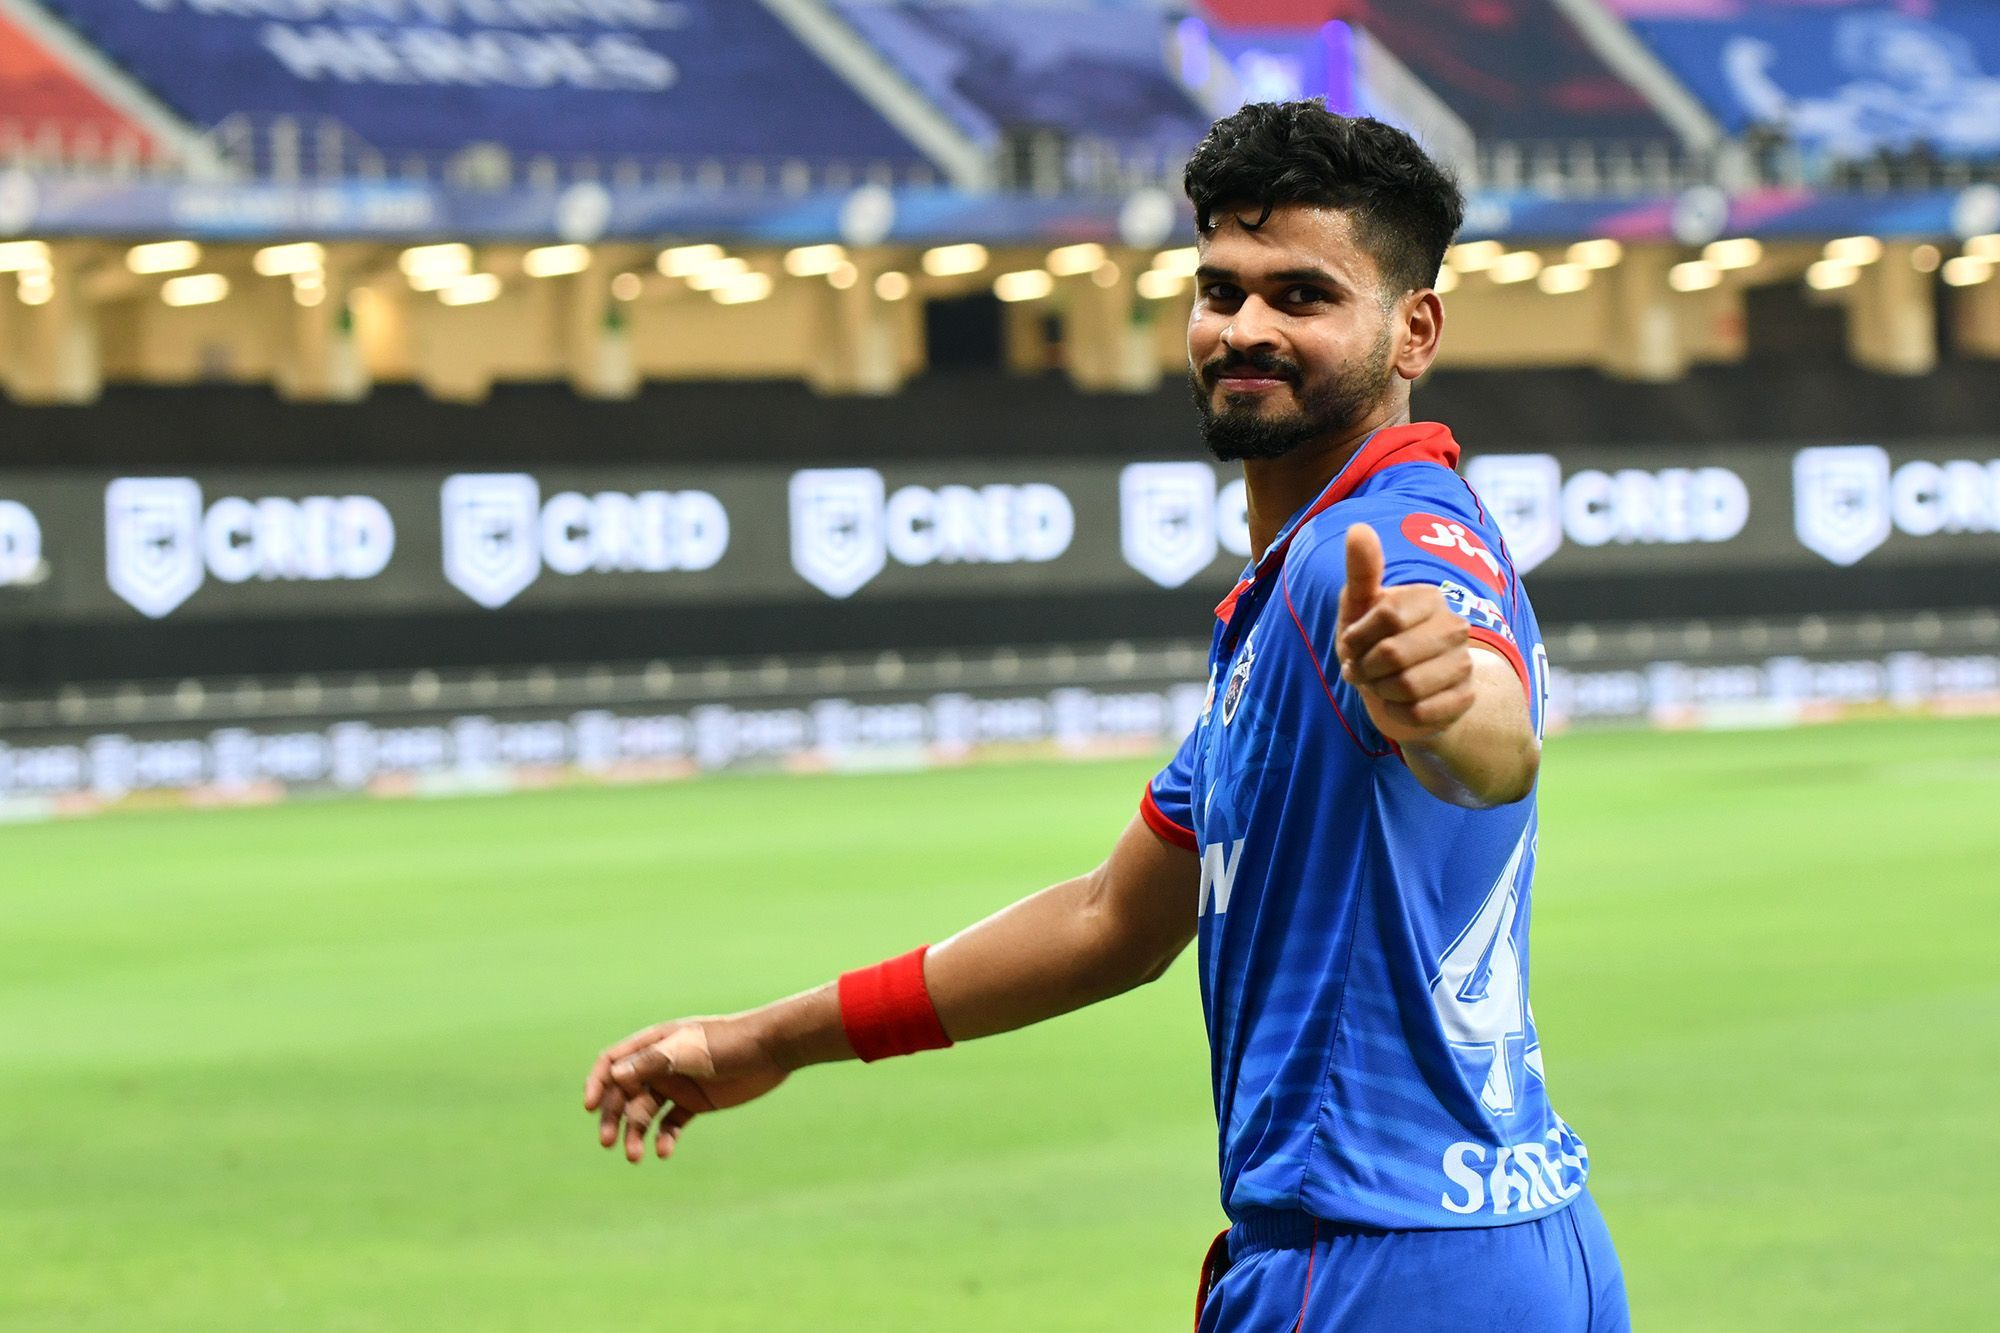 Shreyas Iyer or Suryakumar Yadav - who would you rather have in your T20 team?